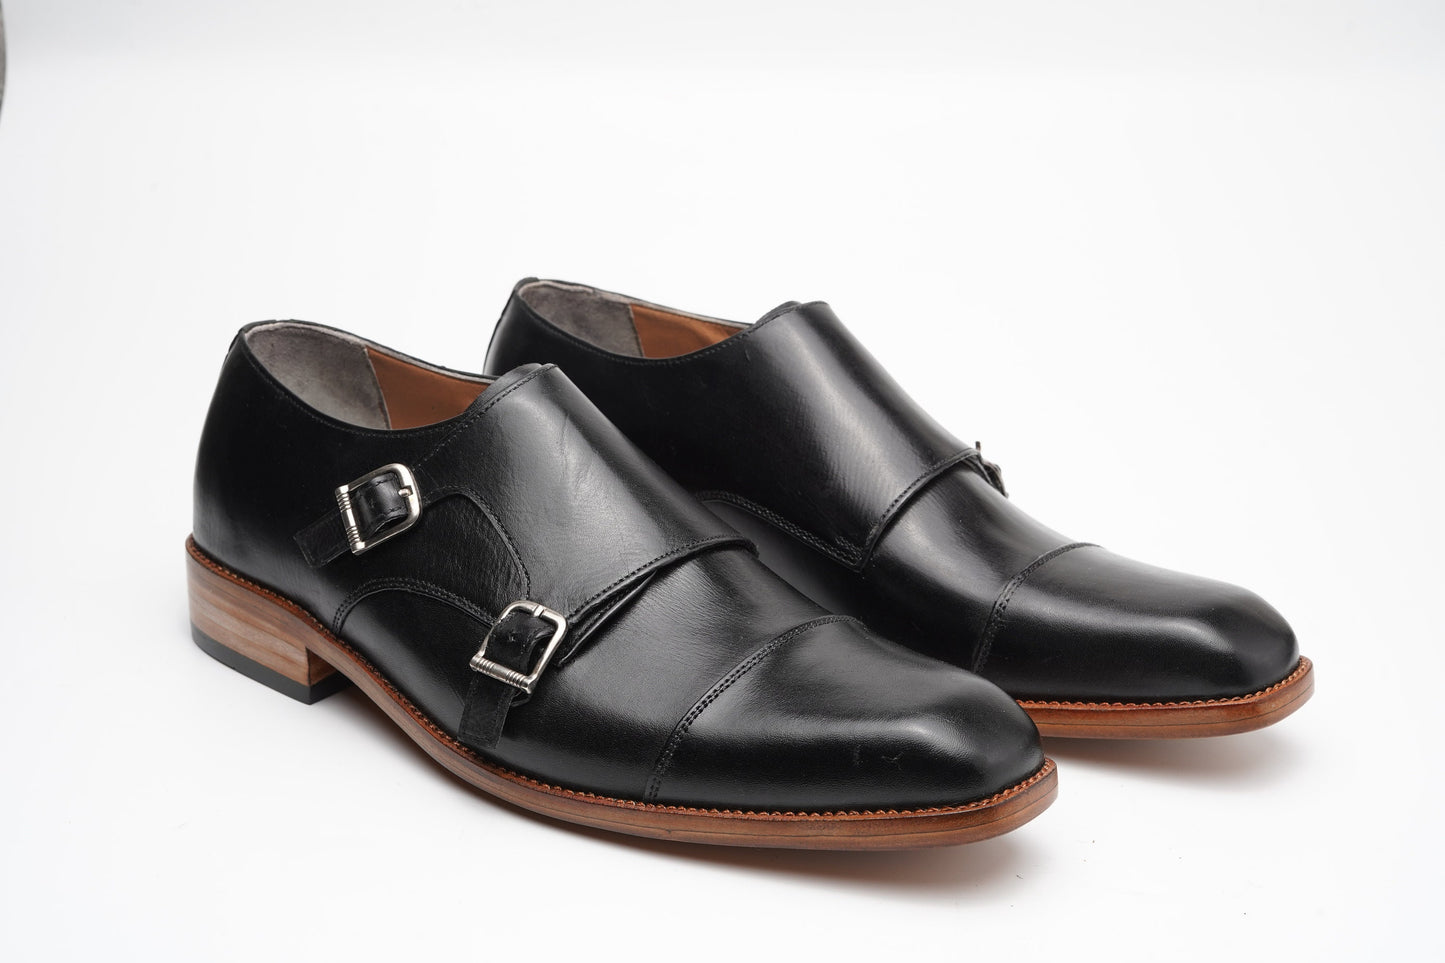 Black Double Buckle Cap Toe Monk Custom Made-To-Order Shoes  Premium Quality Handmade Woozy Store